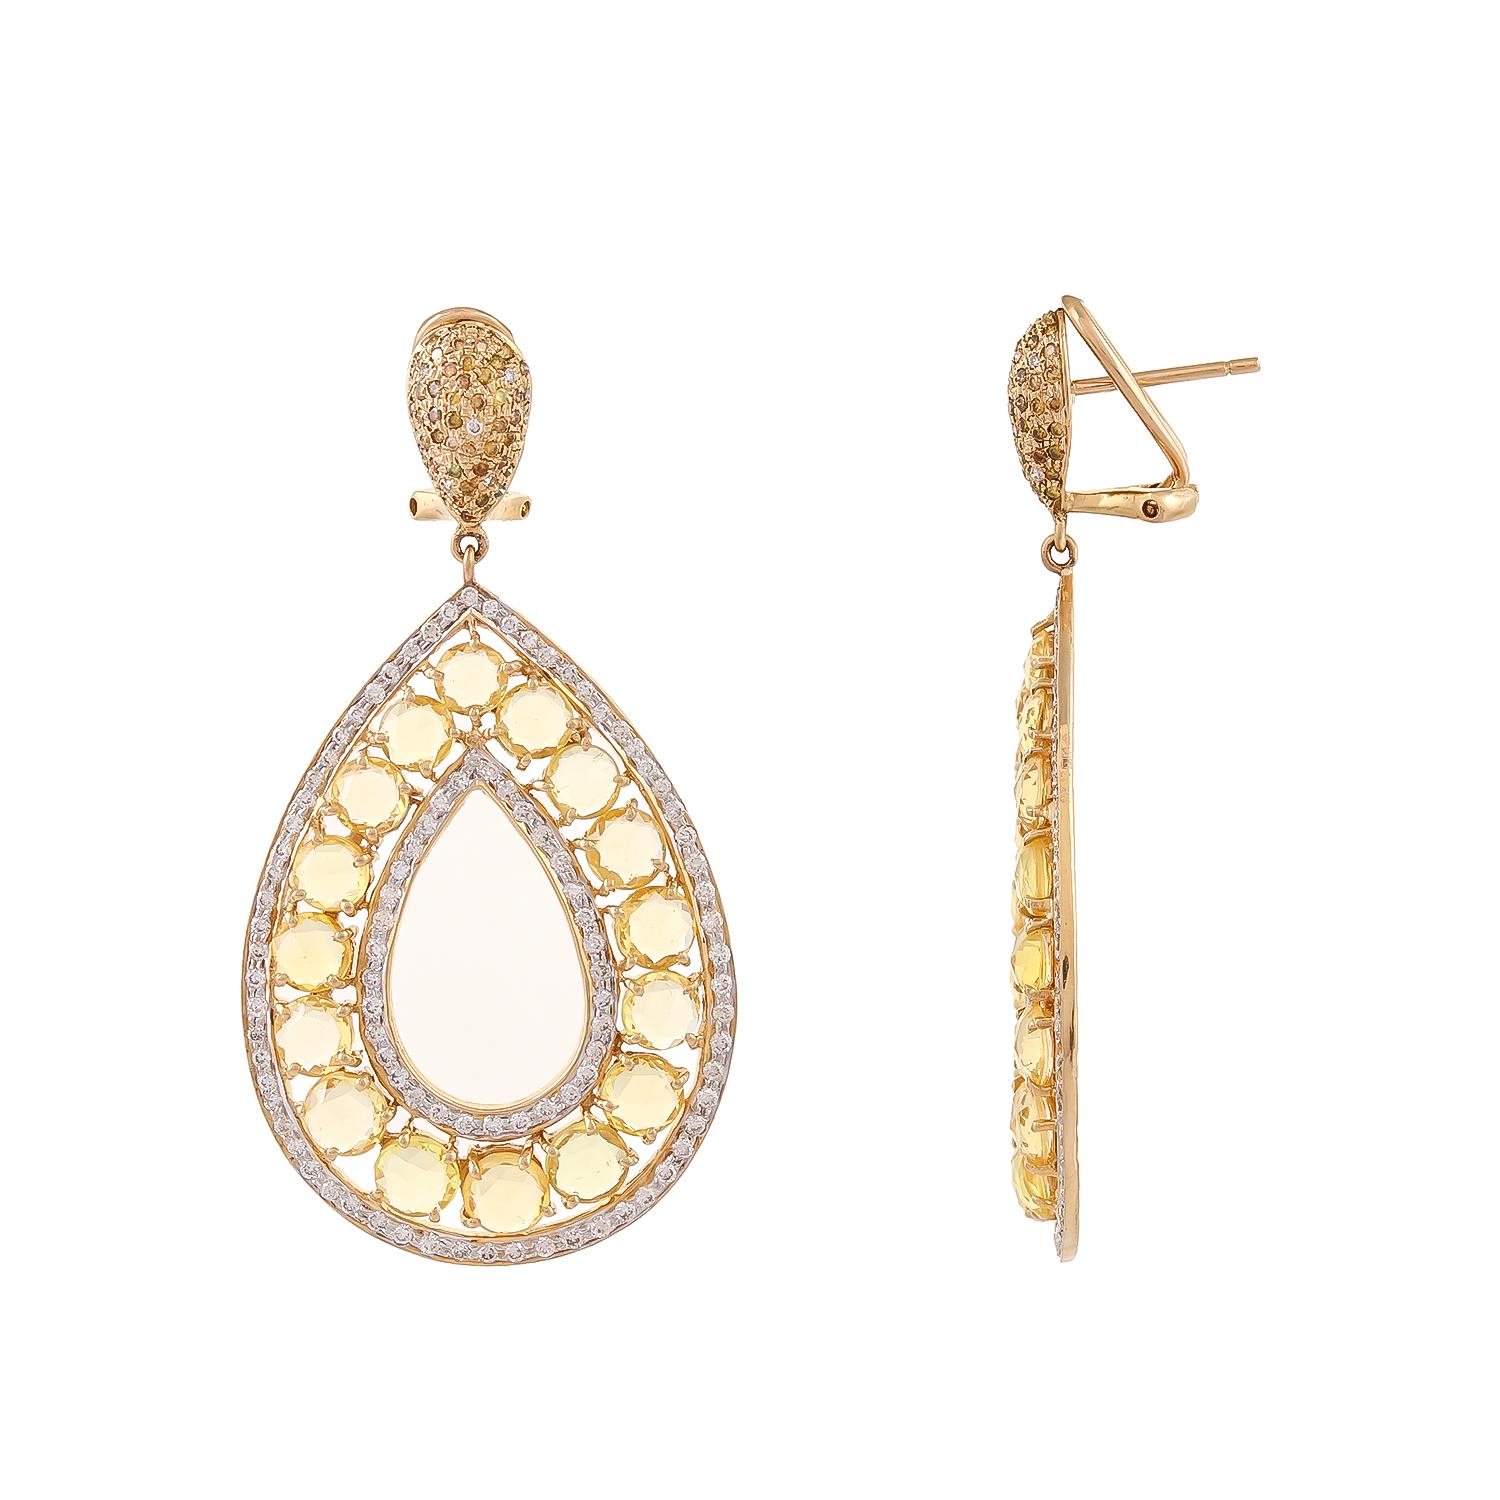 Rose cut yellow sapphires make the most alluring shapes in a pear drop in 18kt gold earrings. Topped with yellow colored pave set 0.56ct diamonds top will make the perfect jewelry you could pair any outfit with